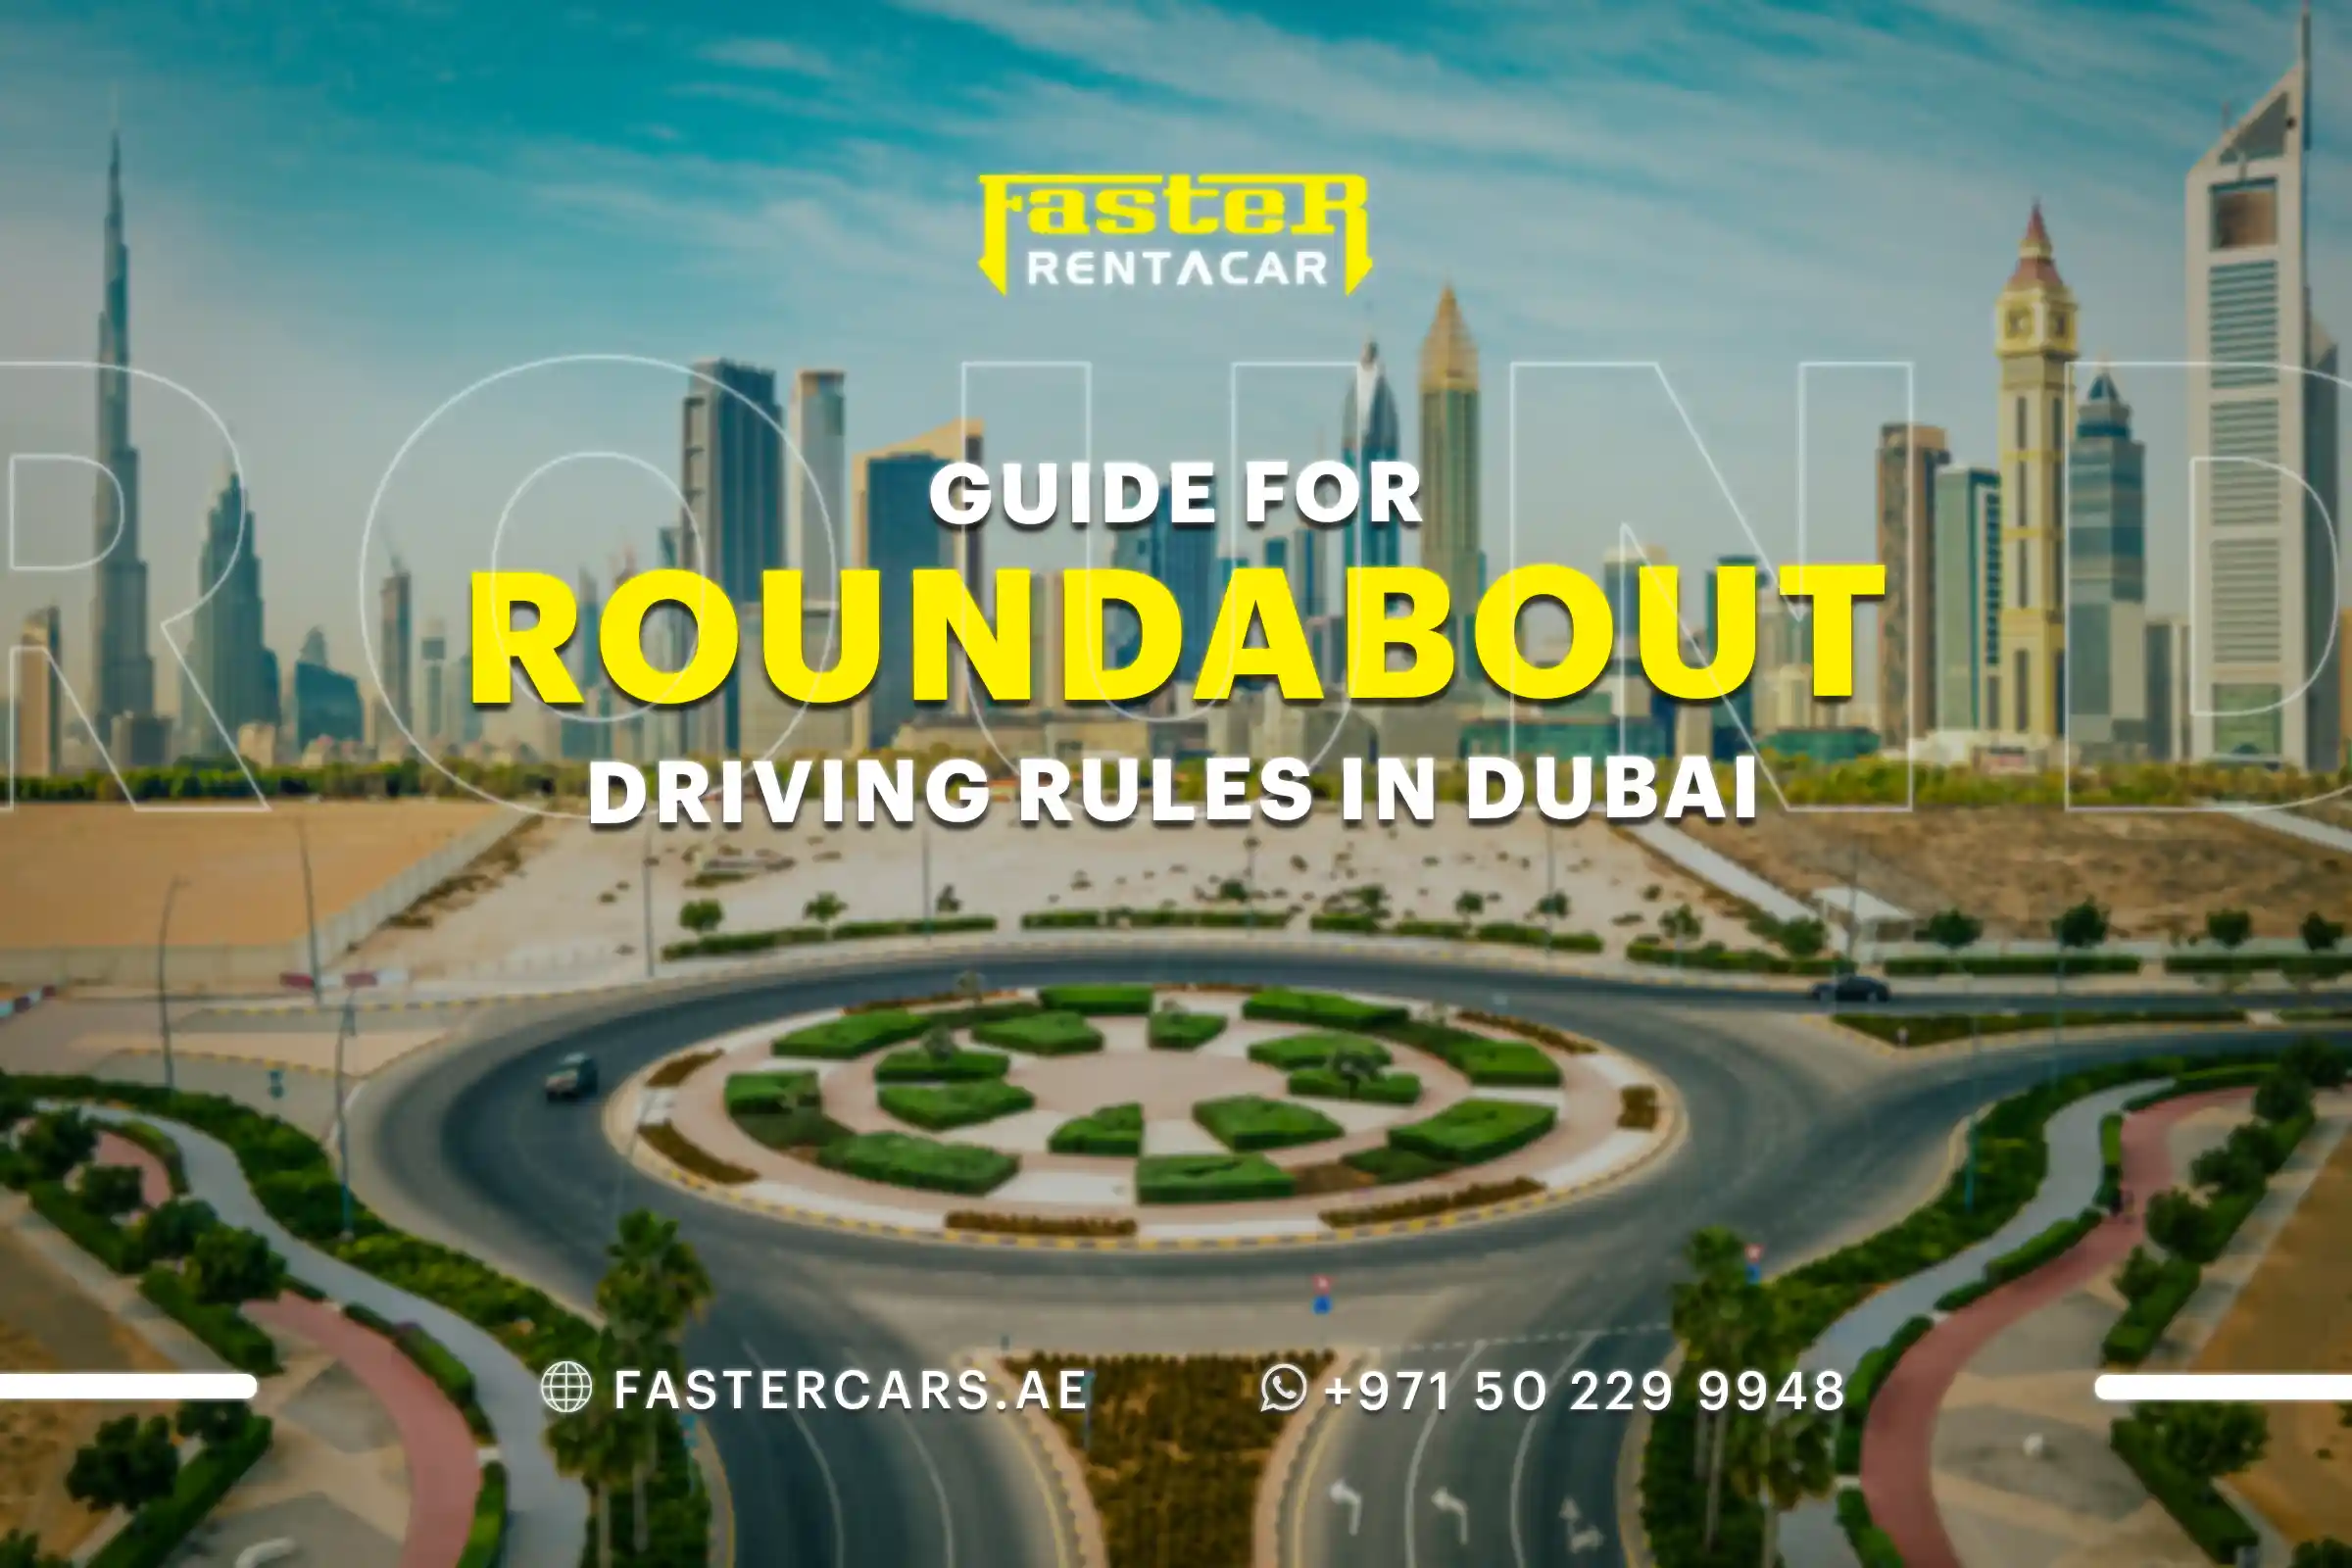 Guide For Roundabout Driving Rules in Dubai